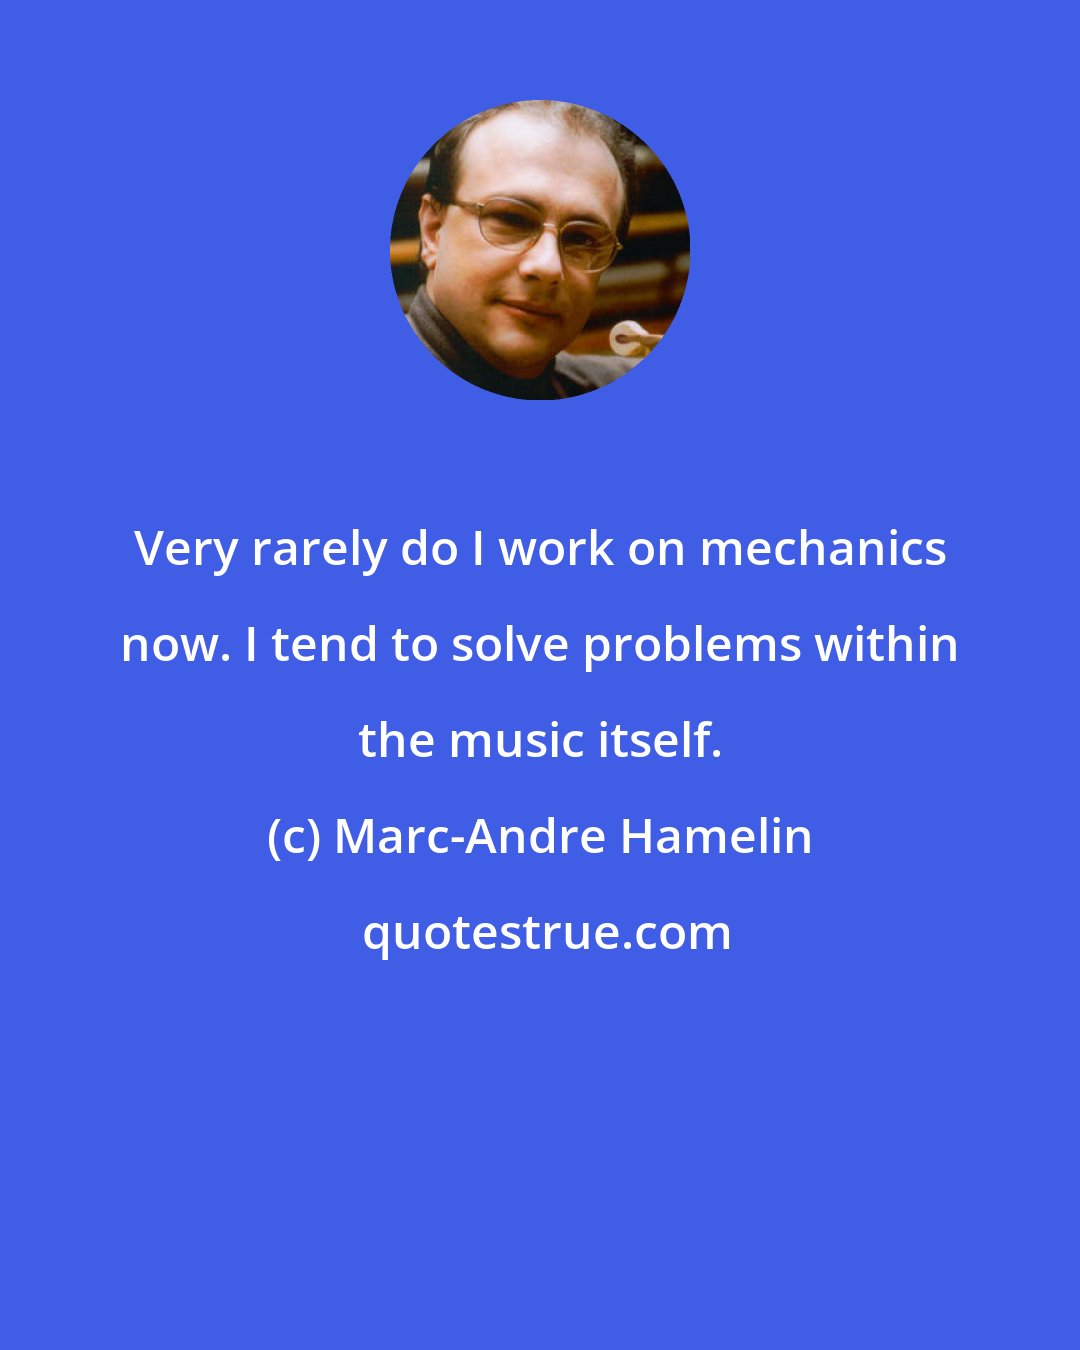 Marc-Andre Hamelin: Very rarely do I work on mechanics now. I tend to solve problems within the music itself.